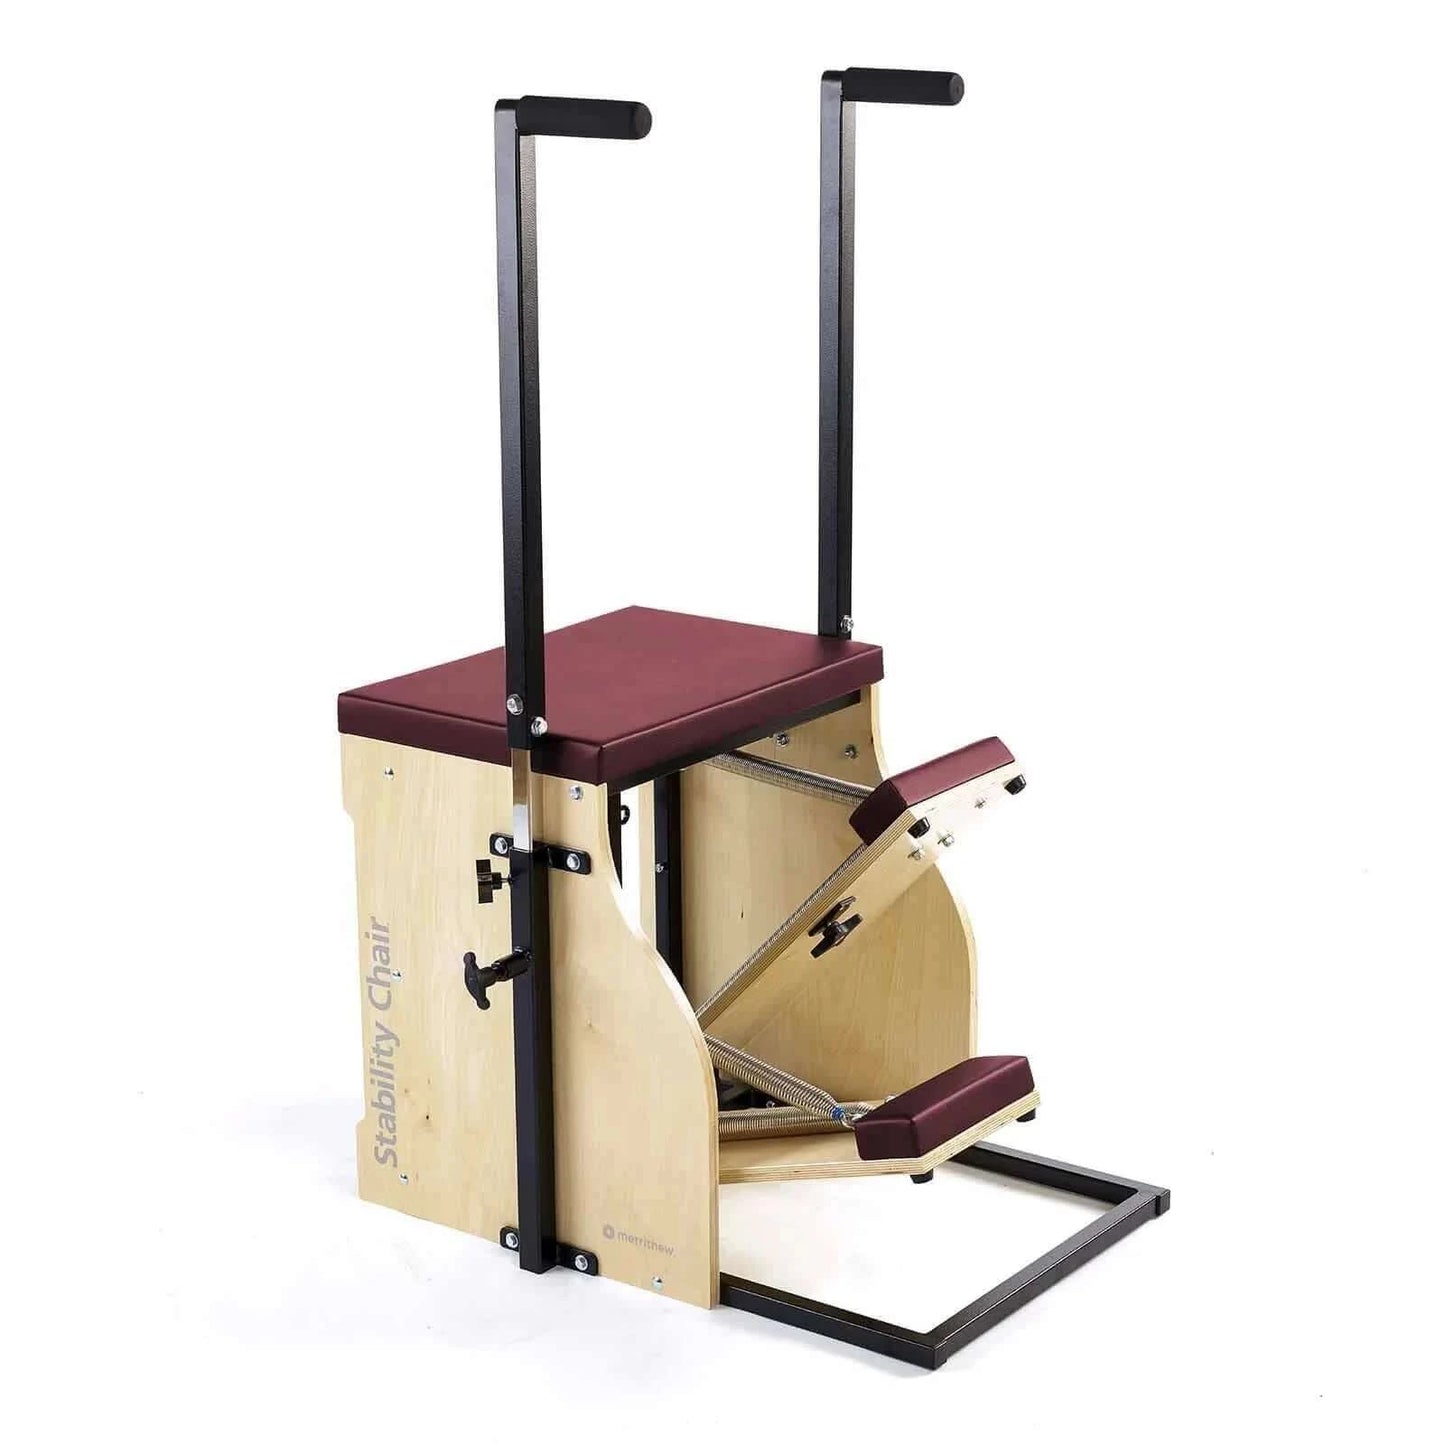 Red Truffle Merrithew™ Pilates Split-Pedal Stability Chair™ by Merrithew™ sold by Pilates Matters® by BSP LLC